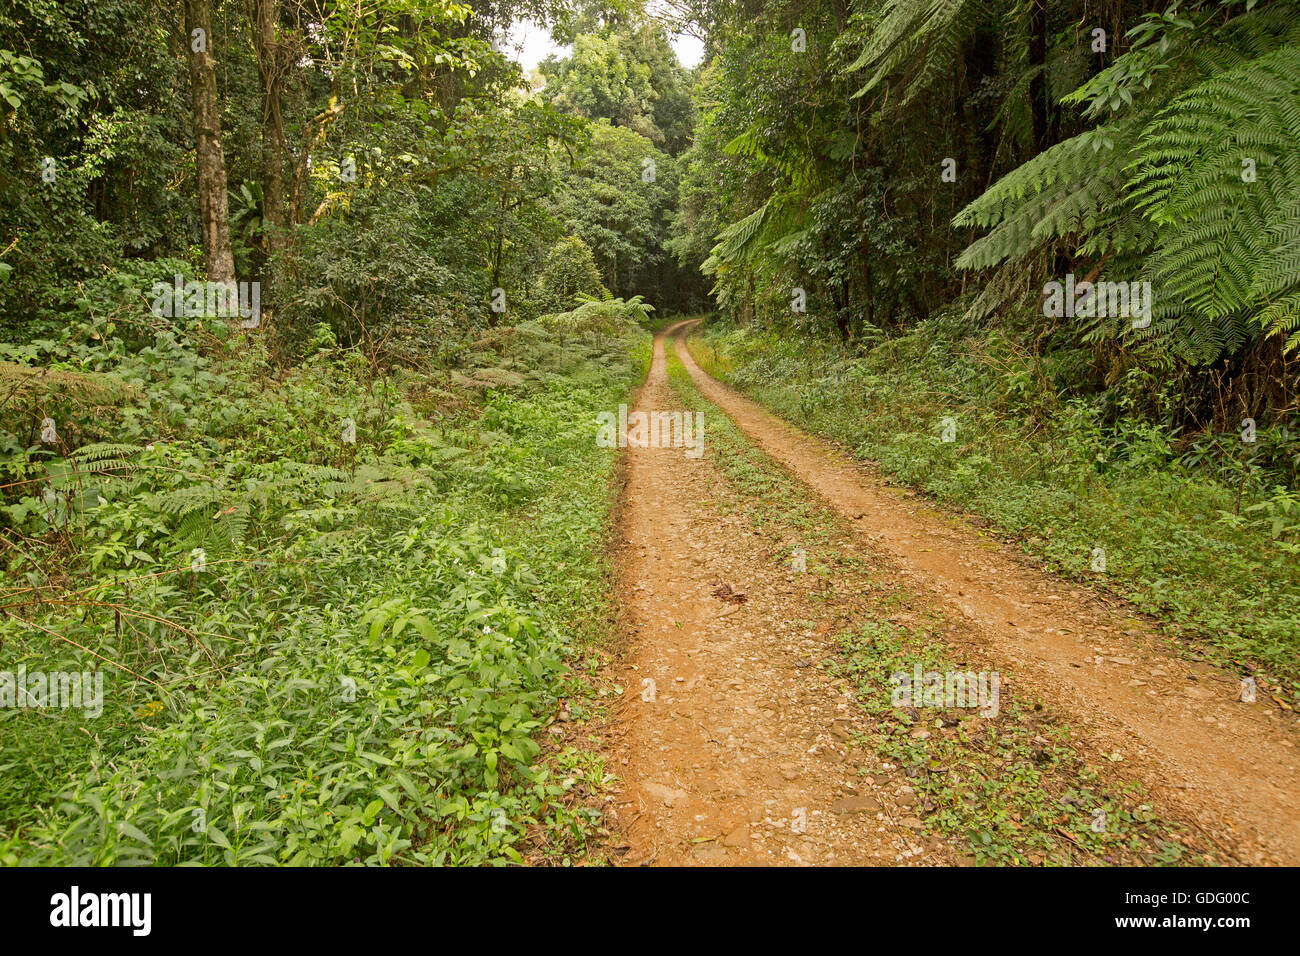 Narrow two wheeled track / road slicing through dense lush green rainforest with tree ferns in Australian Great Dividing Range Stock Photo